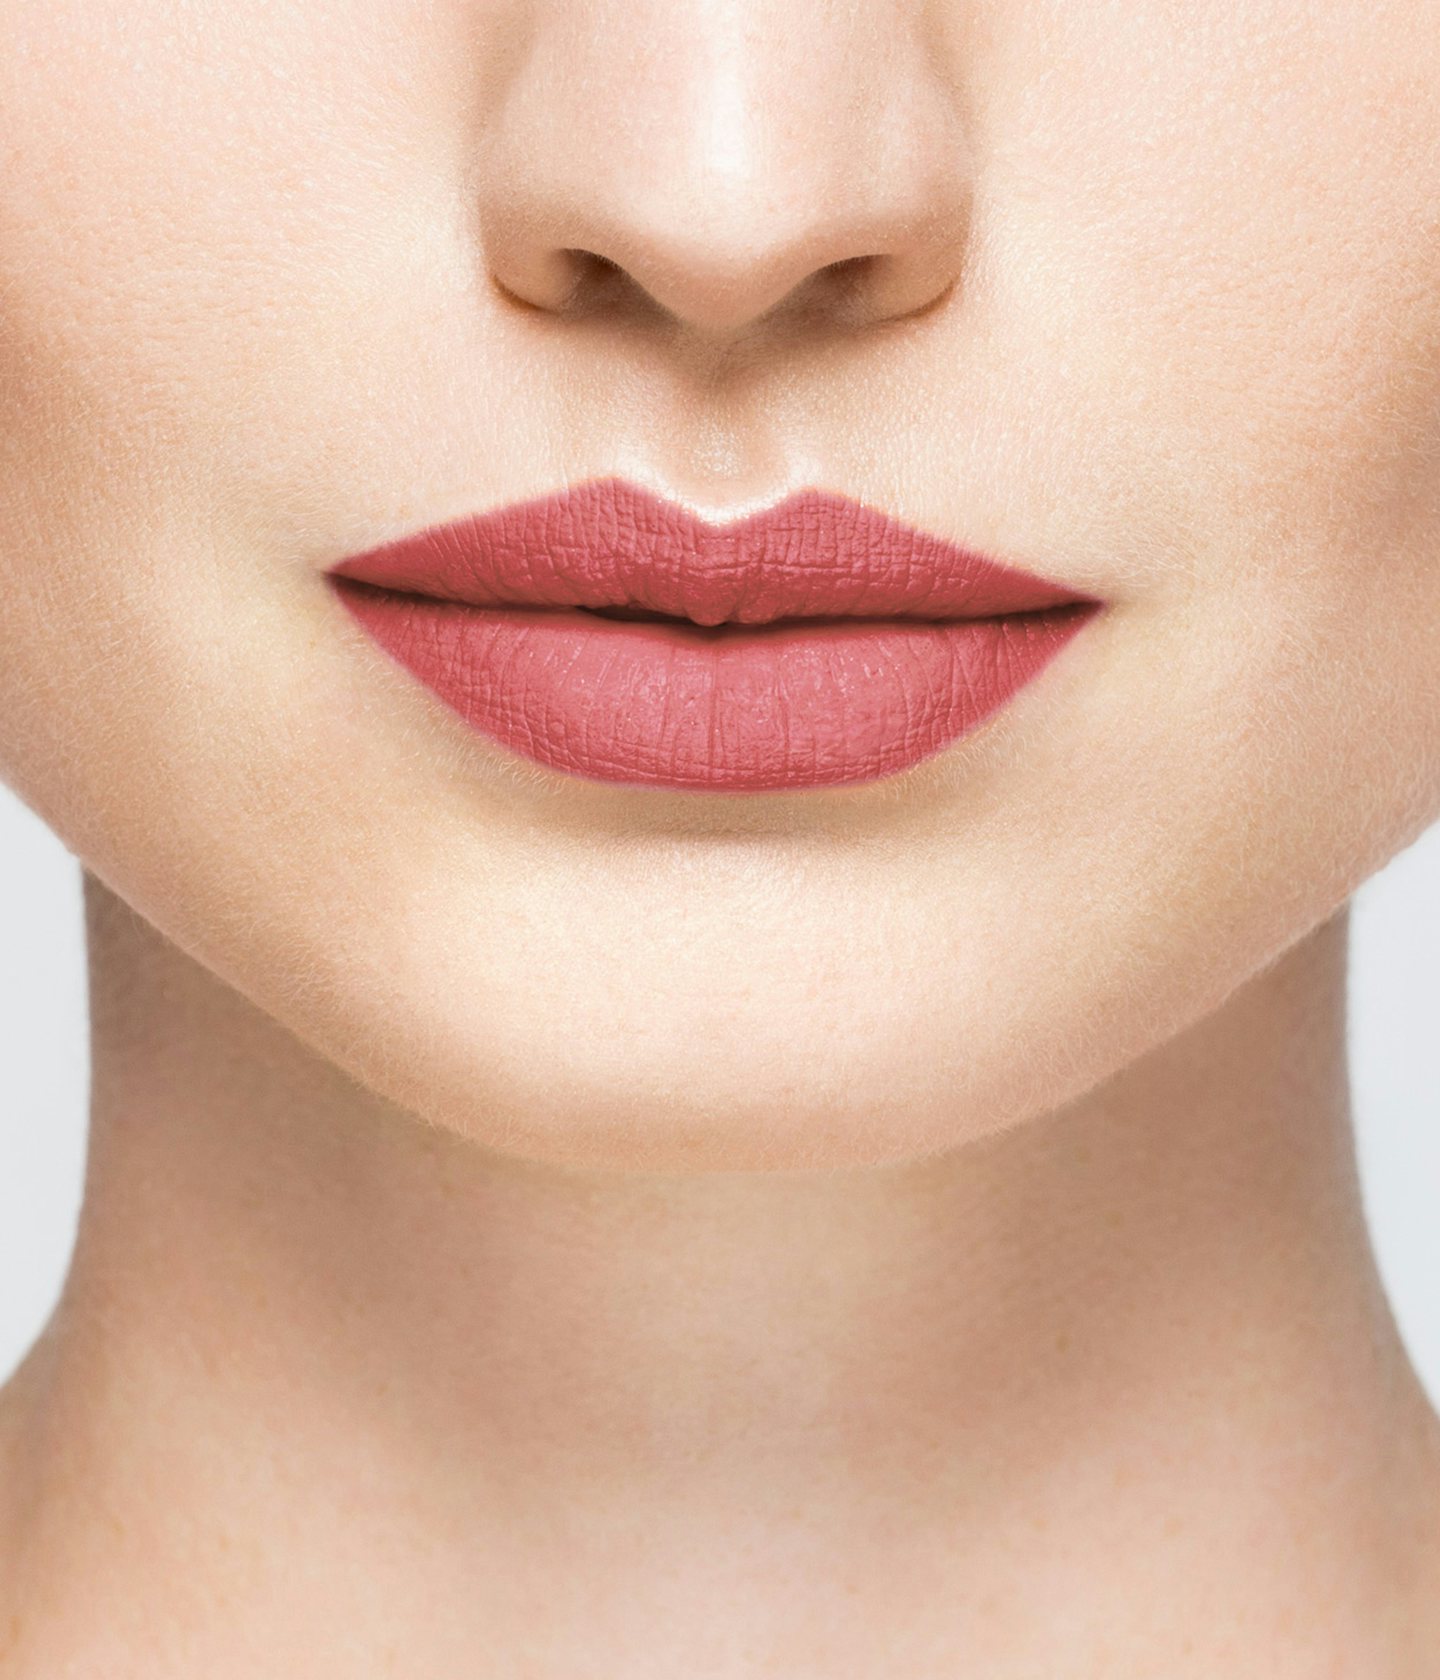 La bouche rouge Cherry Pink lipstick shade on the lips of a fair skin model